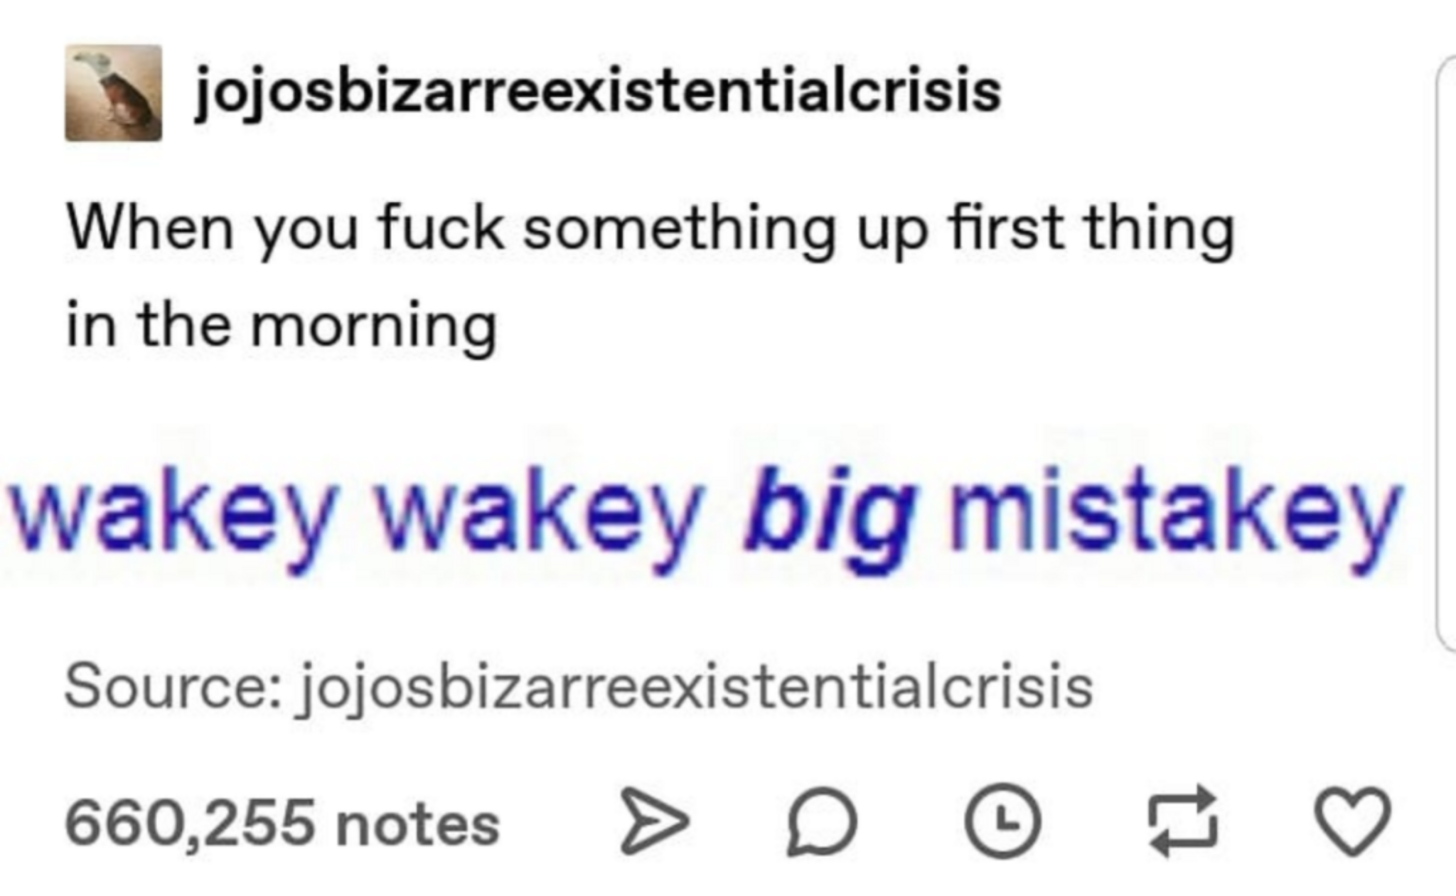 diagram - jojosbizarreexistentialcrisis When you fuck something up first thing in the morning wakey wakey big mistakey Source jojosbizarreexistentialcrisis 660,255 notes > 0